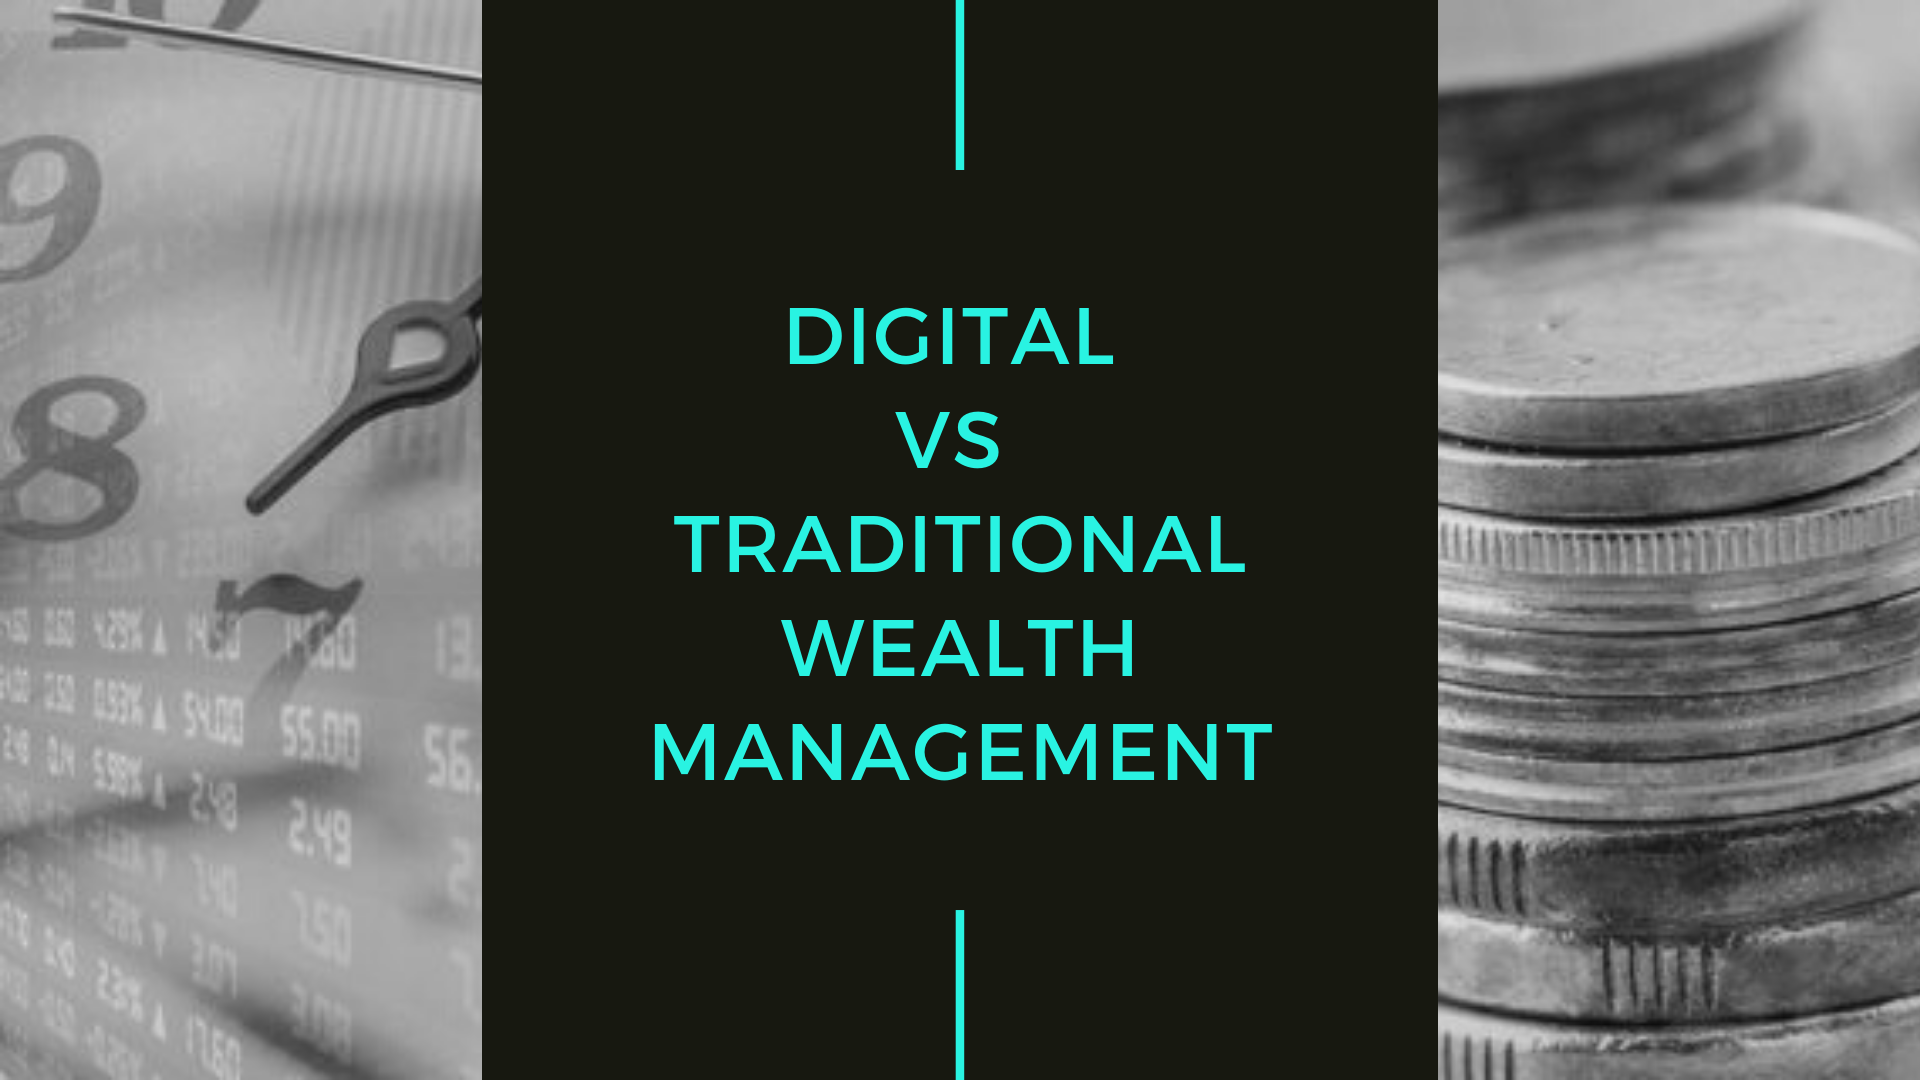 Digital versus traditional wealth management: What midsize firms need to know now